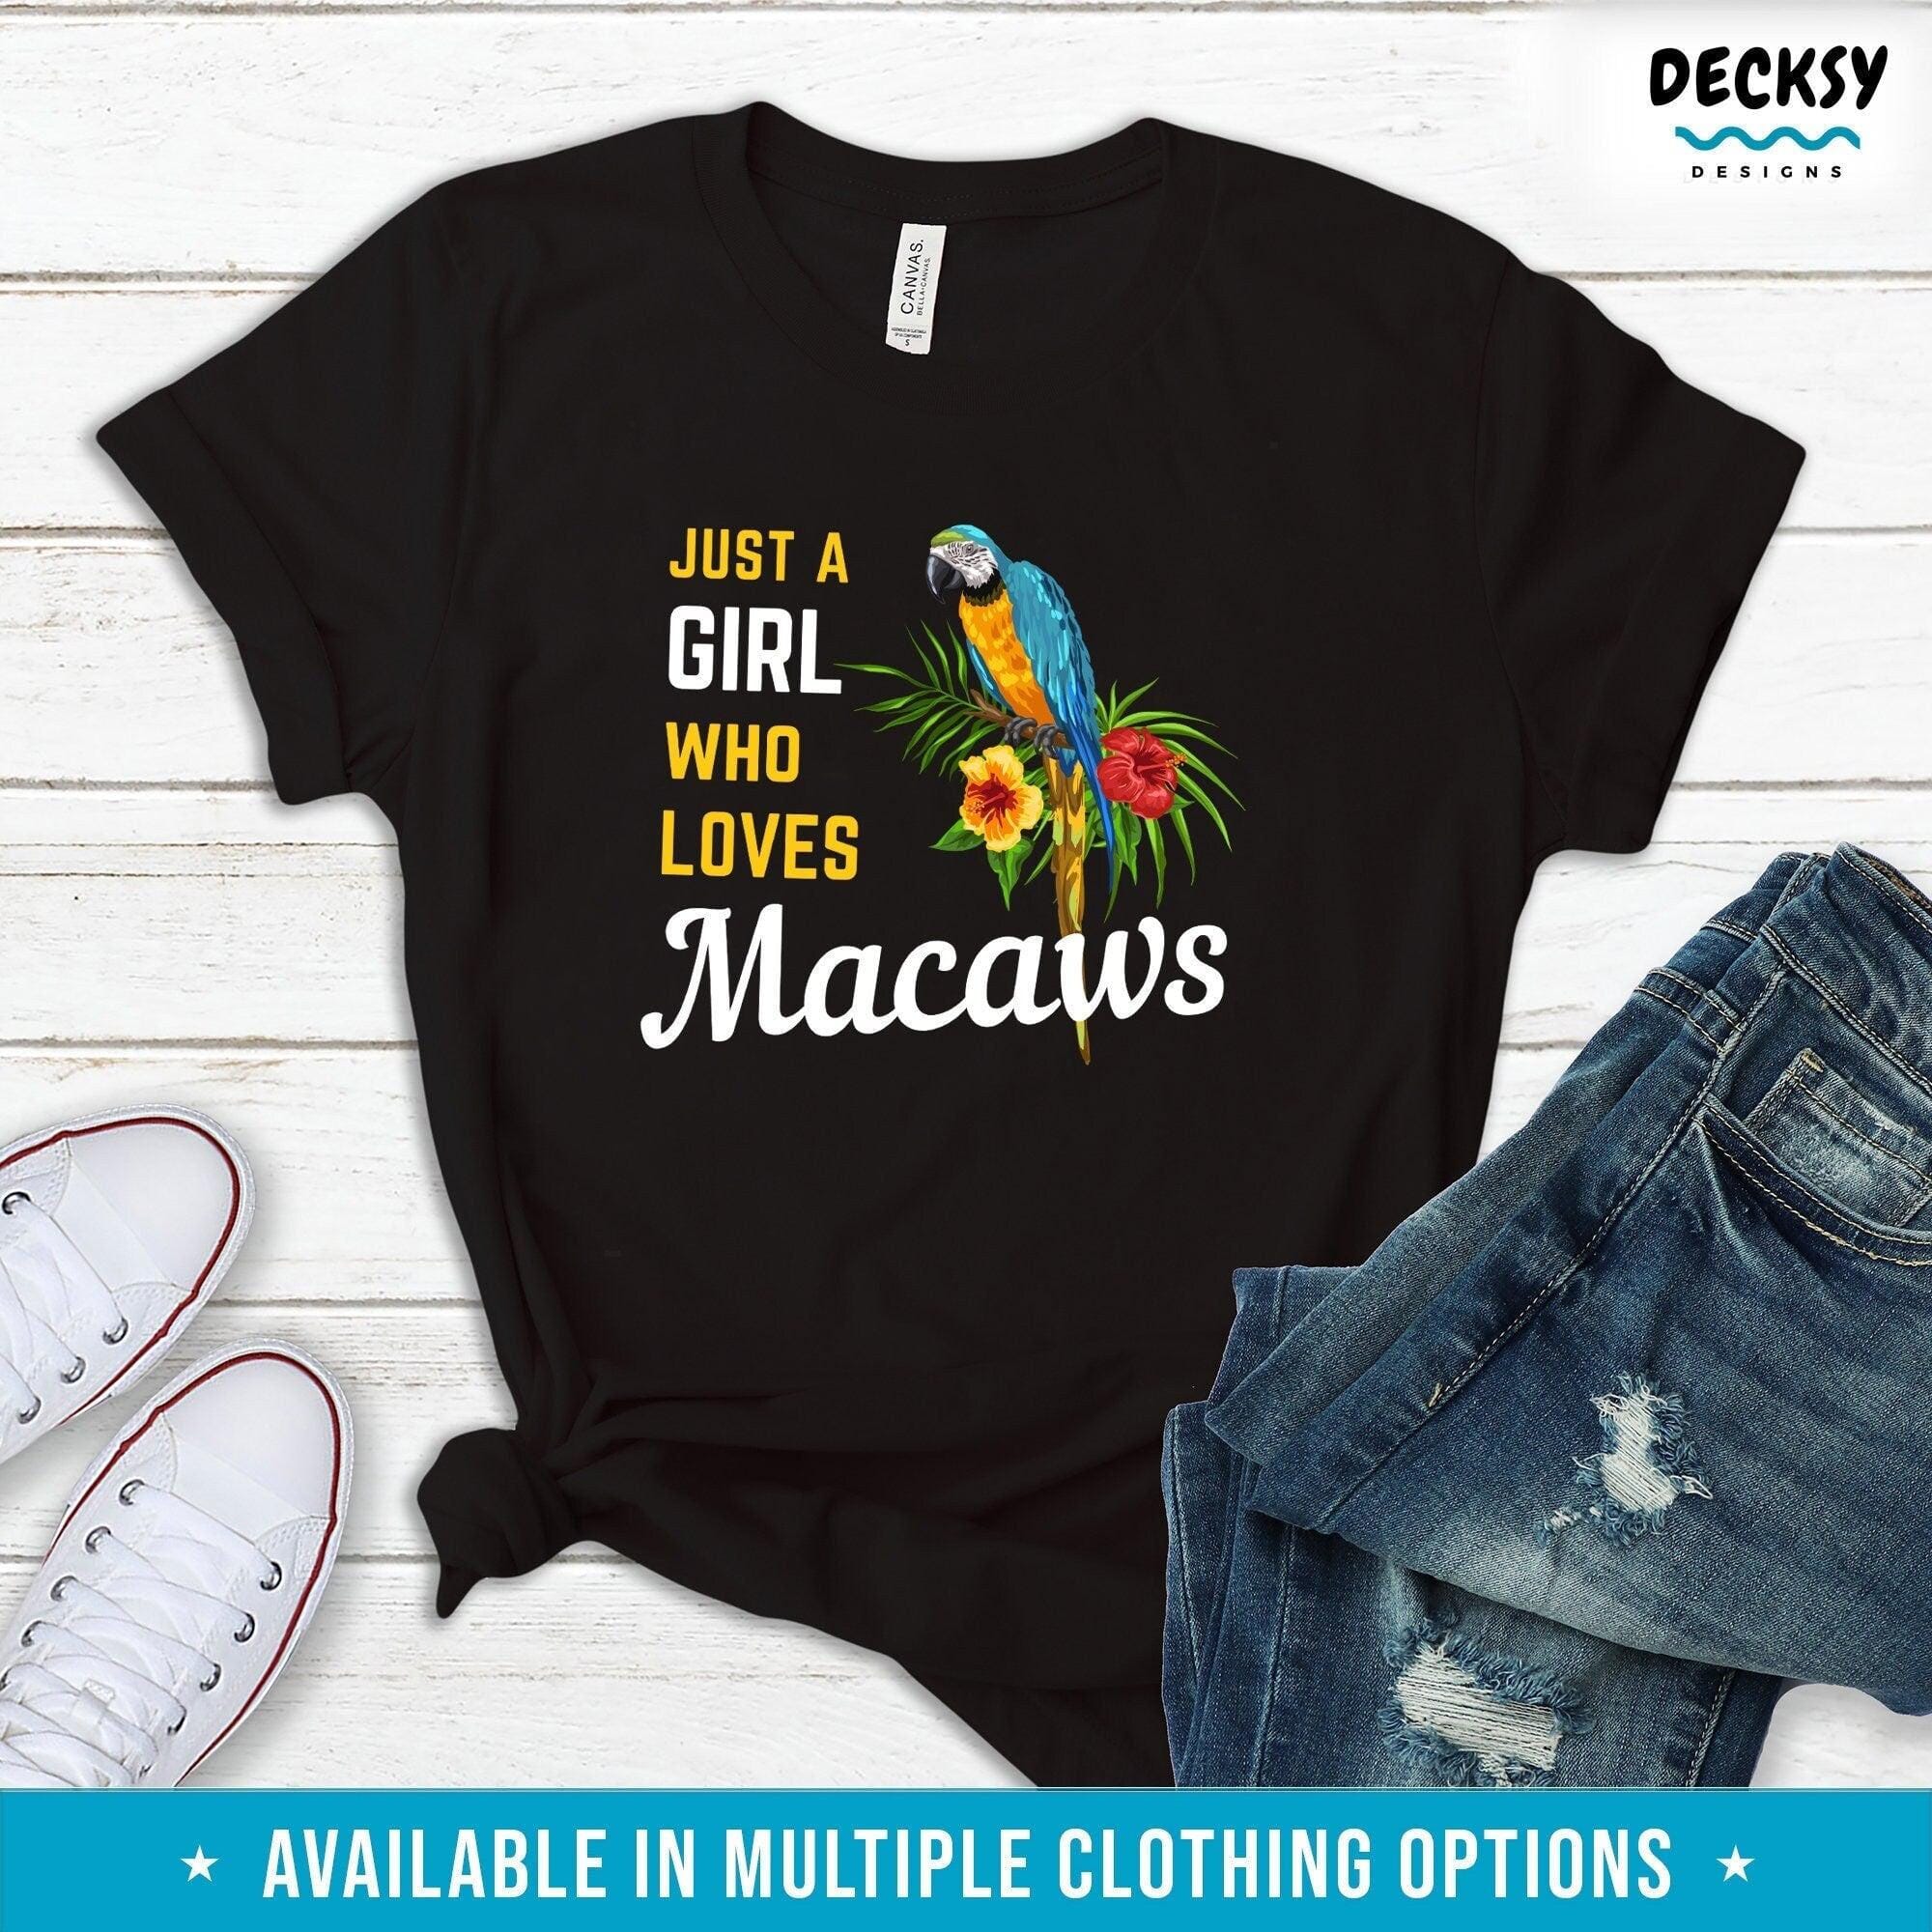 Macaw Shirt For Women, Gift For Bird Lover-Clothing:Gender-Neutral Adult Clothing:Tops & Tees:T-shirts:Graphic Tees-DecksyDesigns